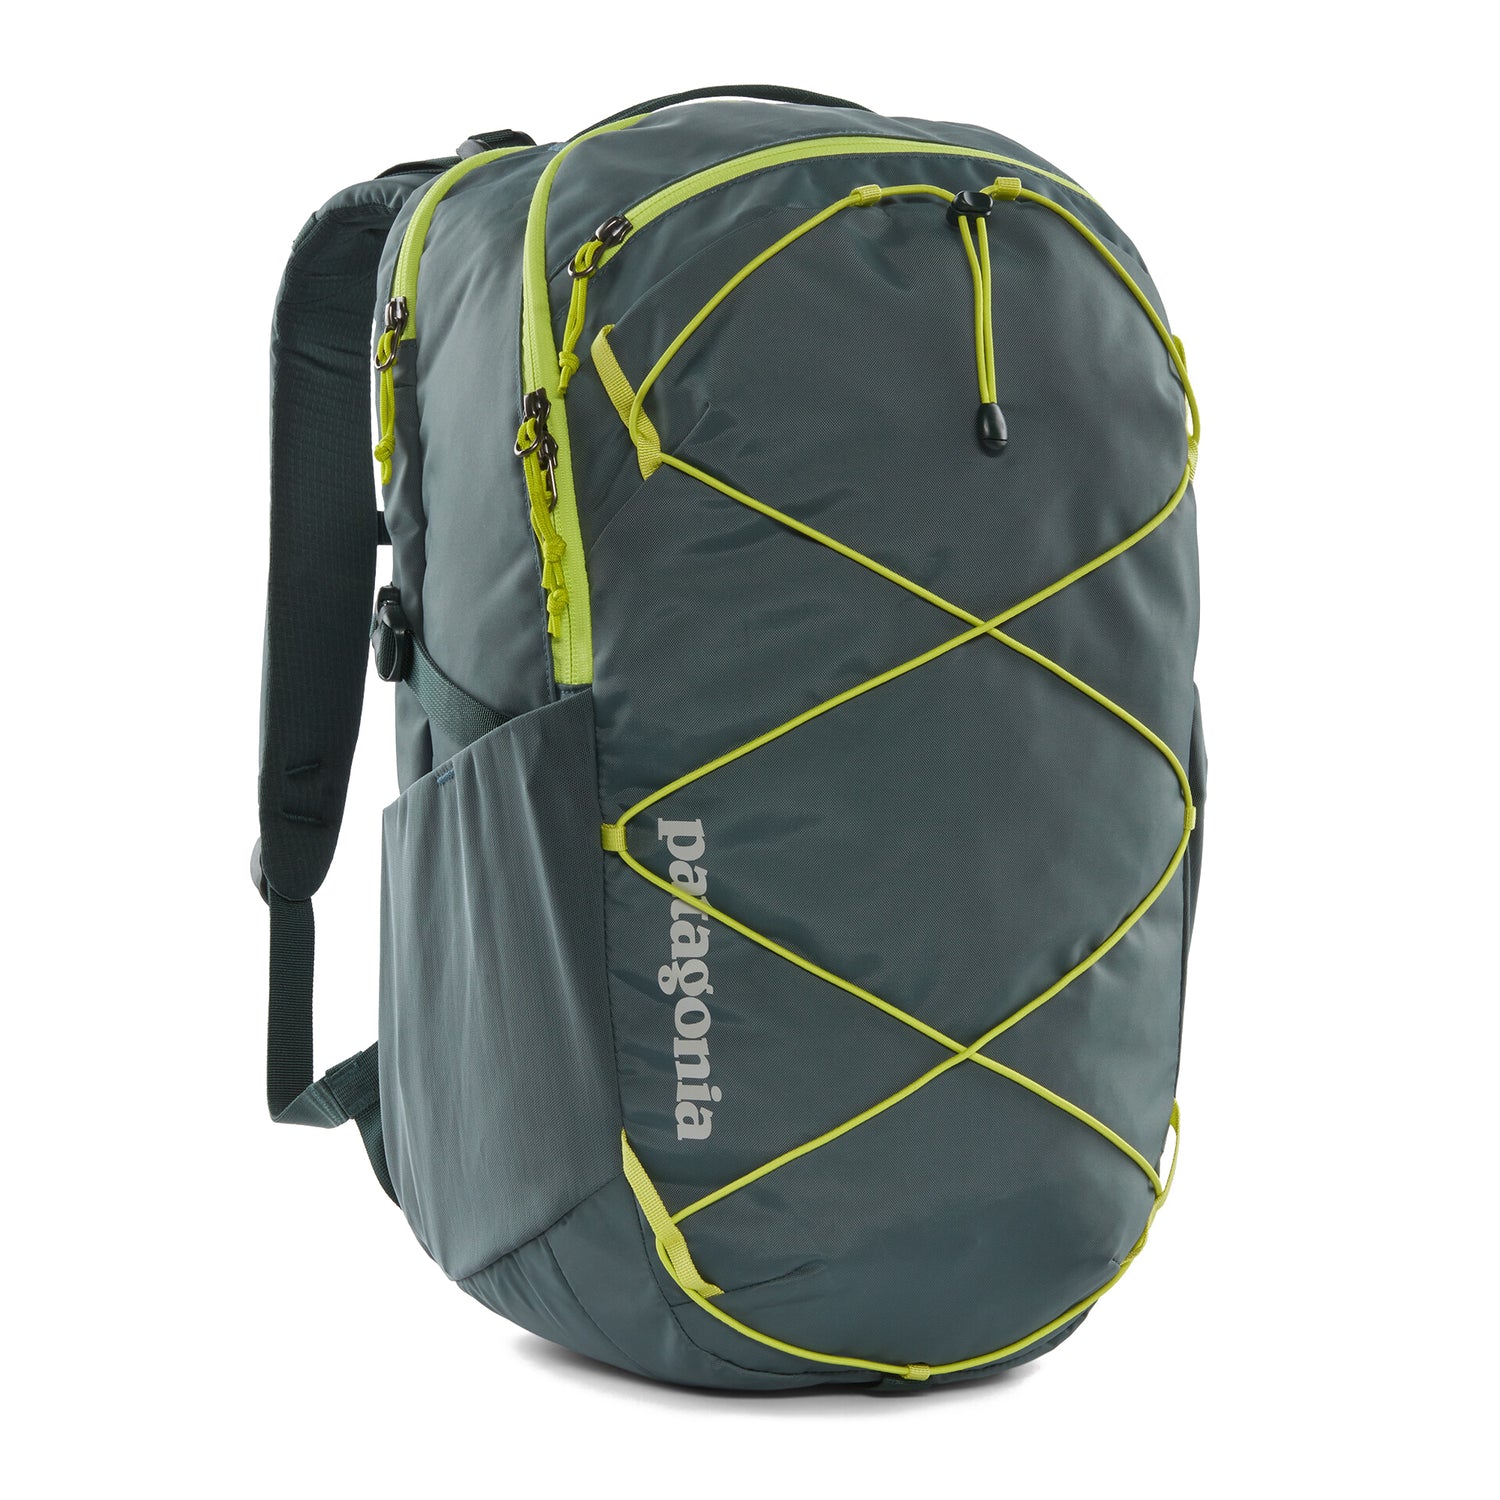 REFUGIO DAY PACK 30L NOUVEAU GREEN